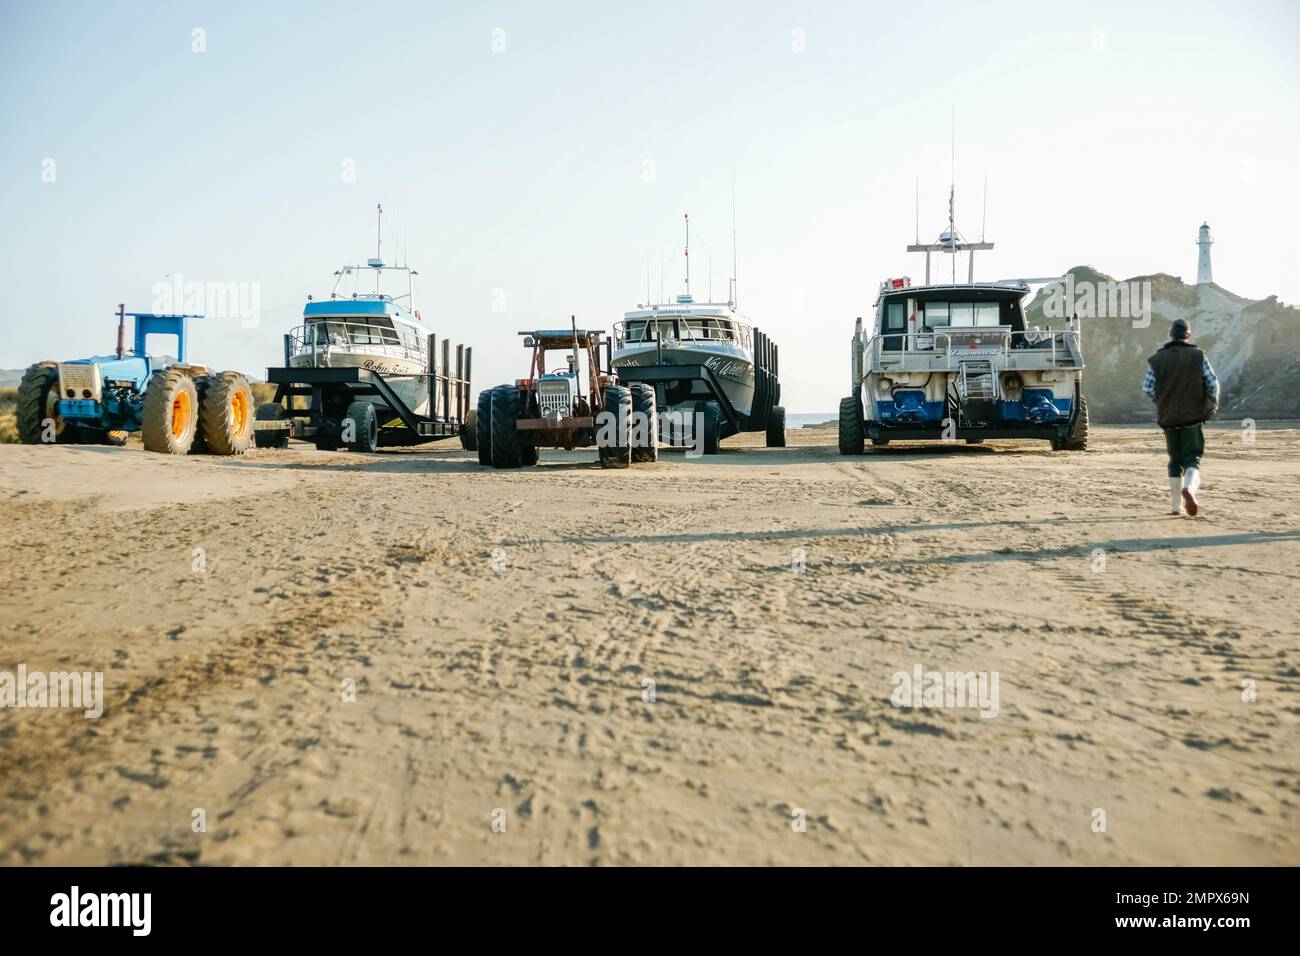 Castle Point, New Zealand - October 5 2010; Four fishing boats and tractors lined up on beach ready to launch Stock Photo